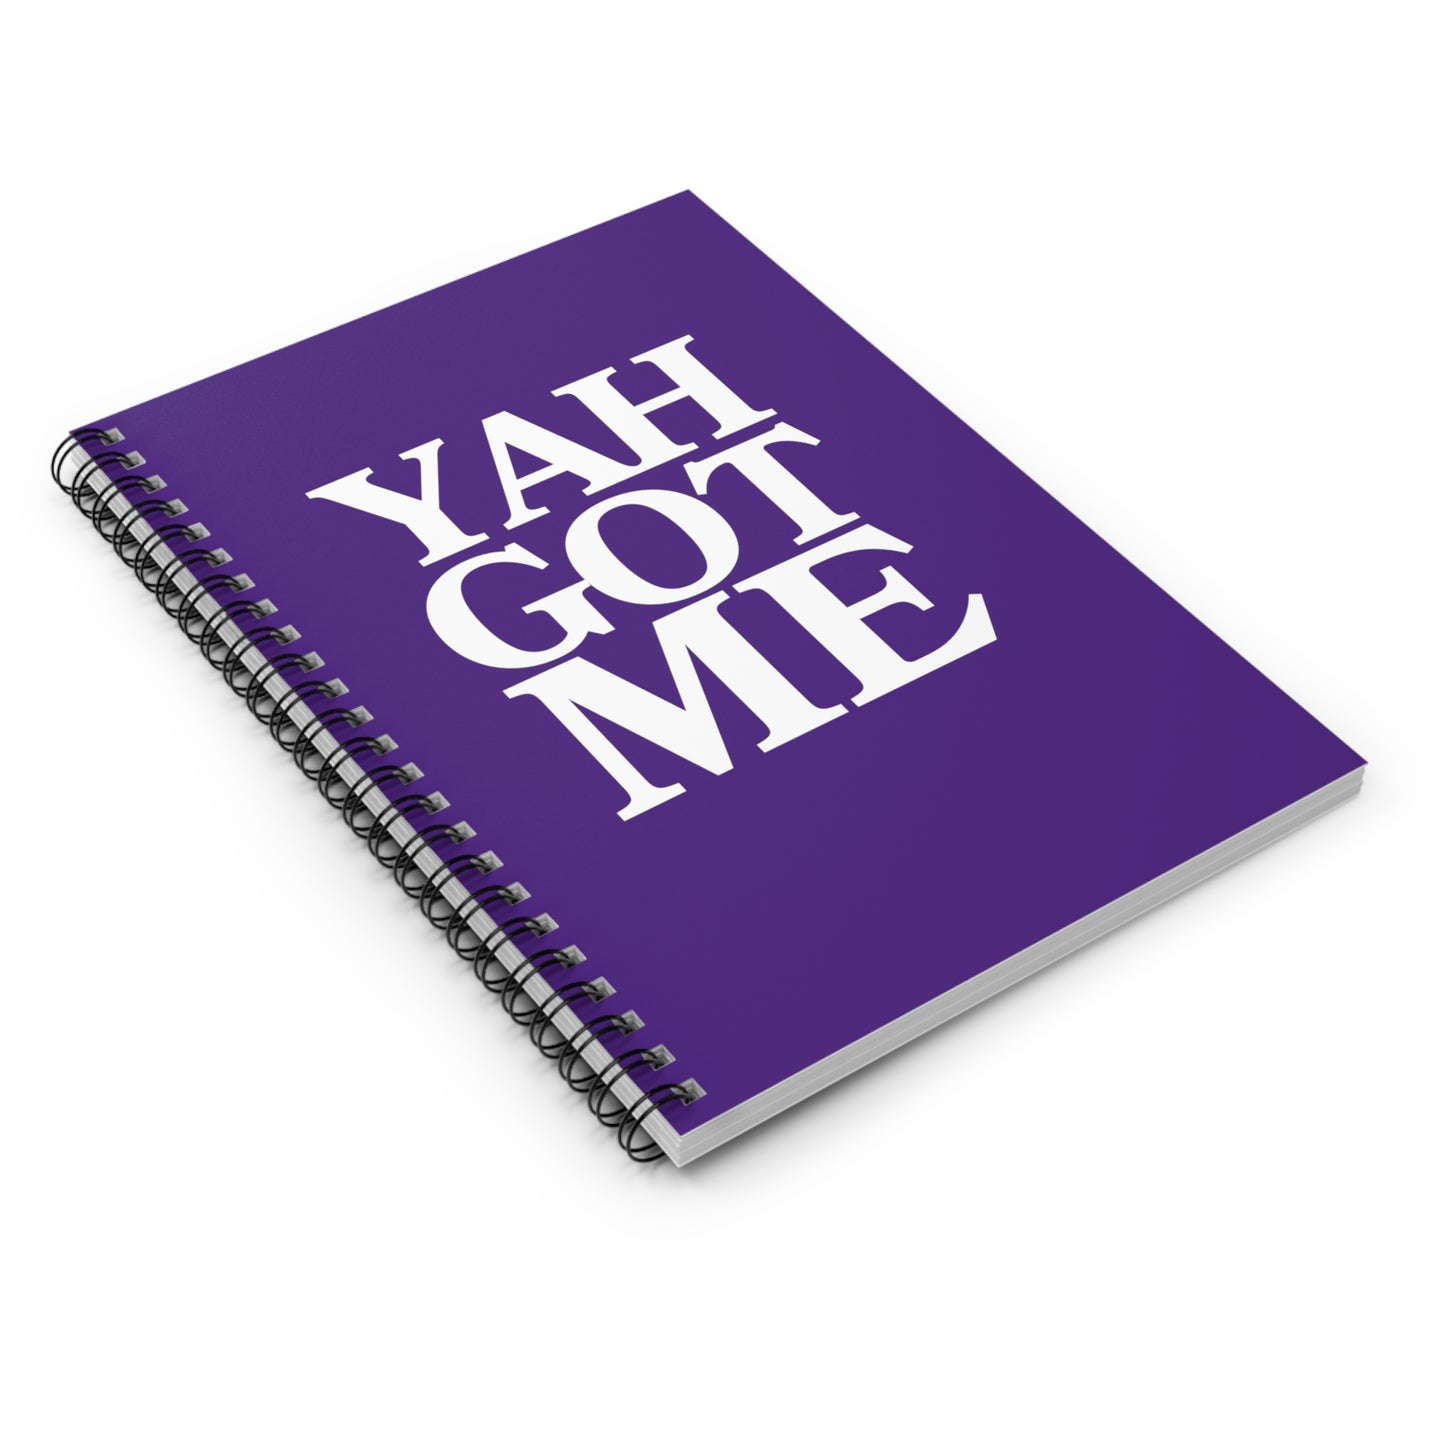 YAH GOT ME Purple Spiral Notebook Prayer Journal - 118 pages Ruled Line